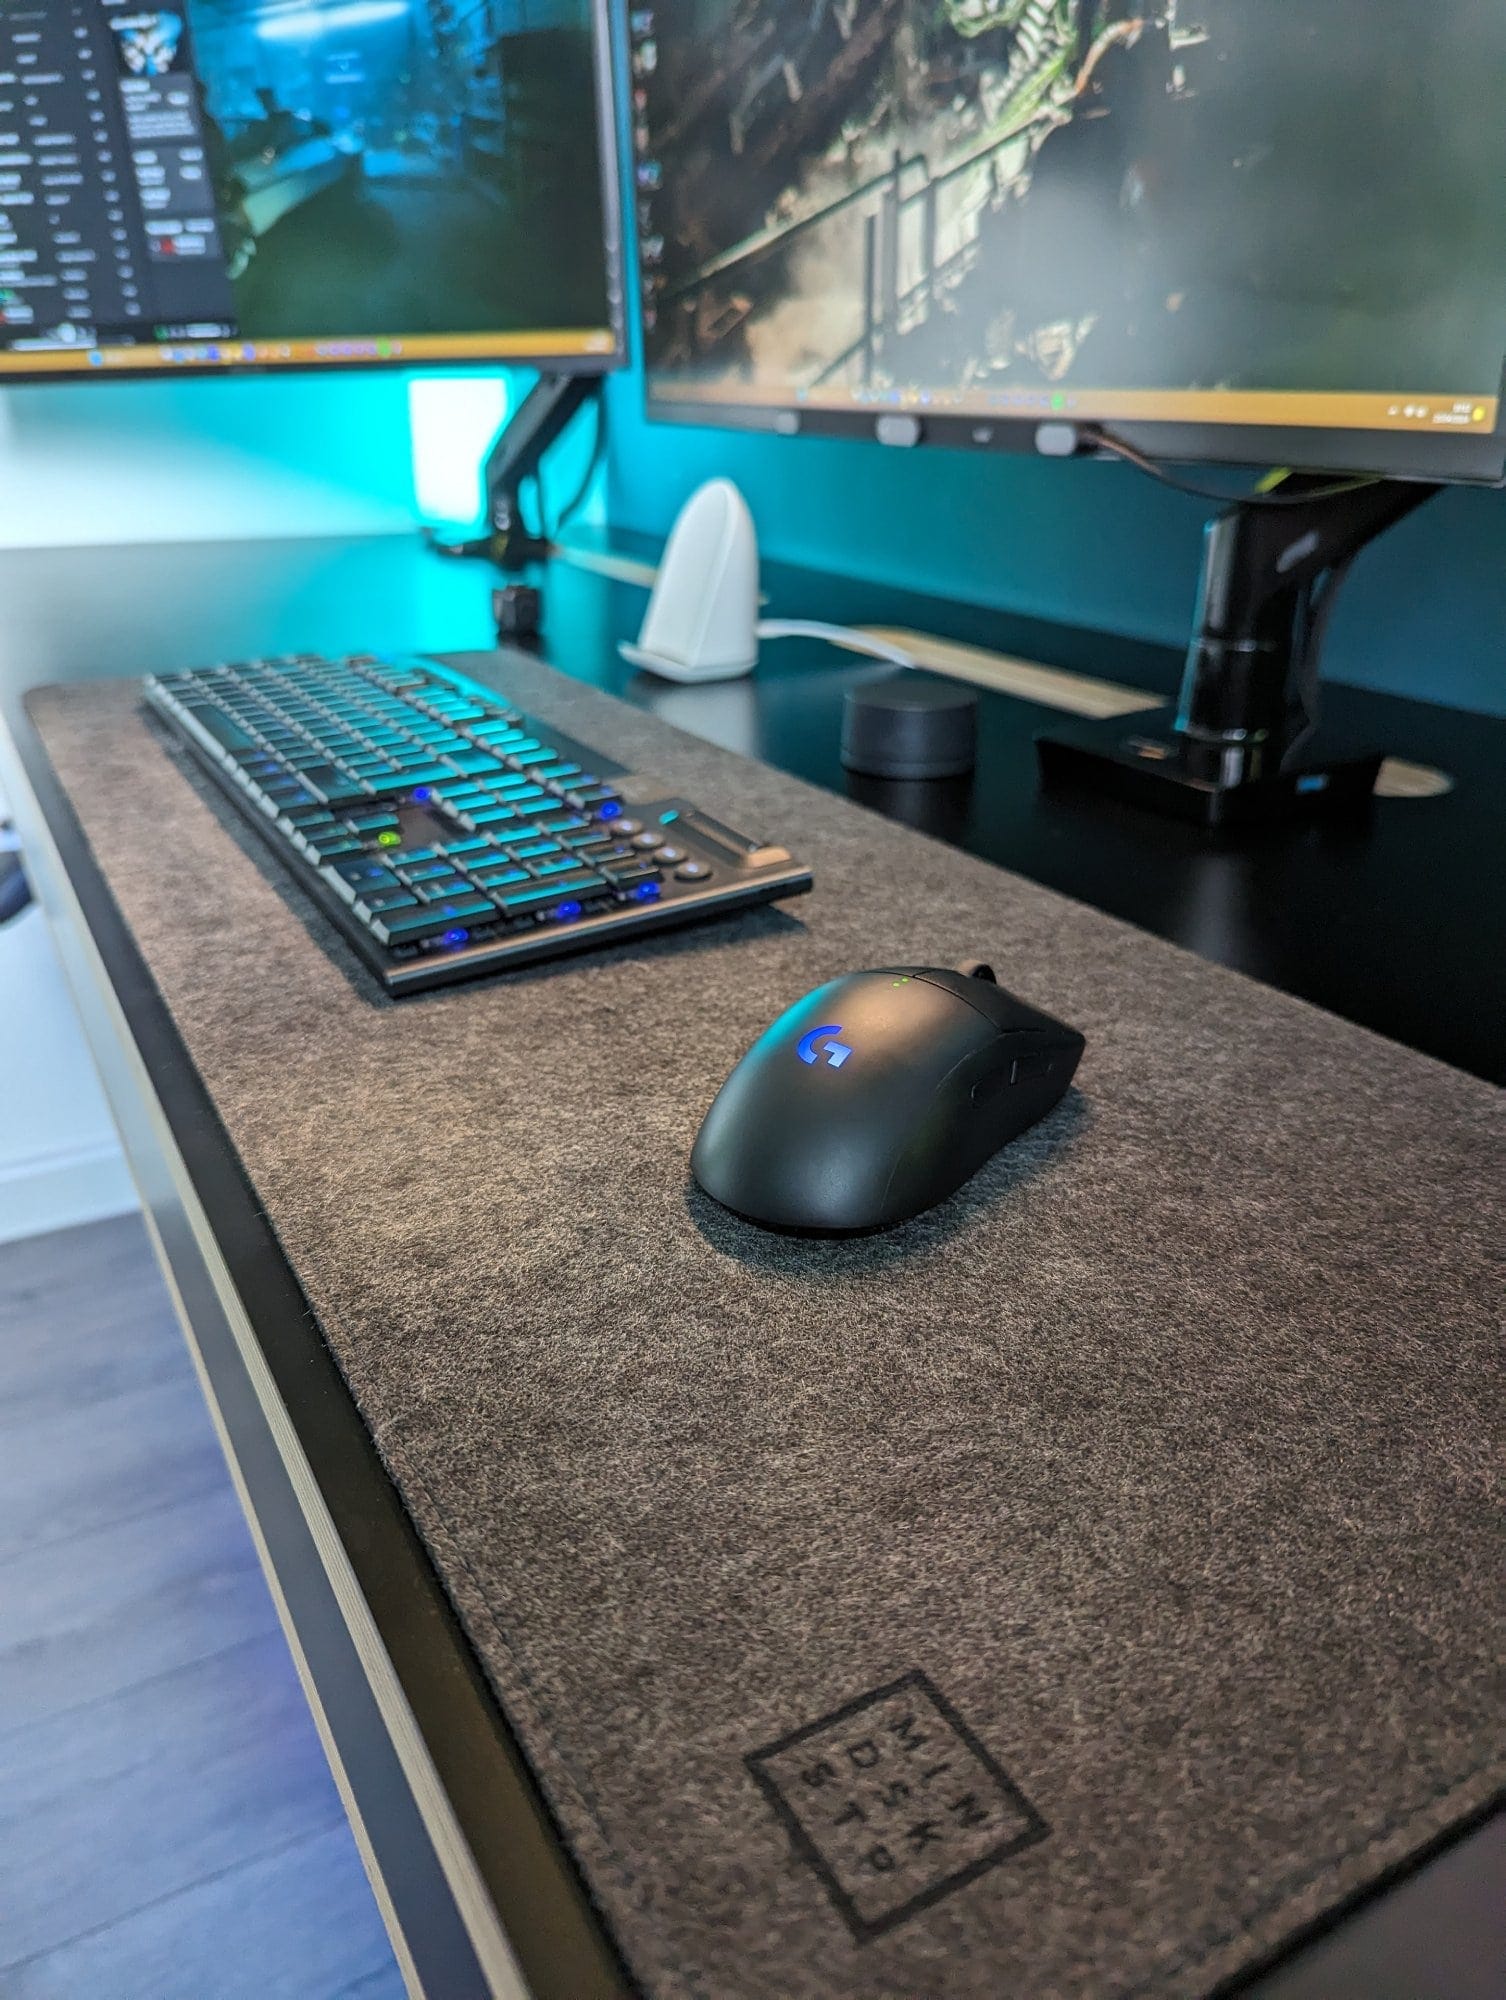 A close-up of a modern home office desk featuring a mechanical keyboard and a wireless mouse on a grey felt desk mat, with multiple monitors displaying game graphics in the background